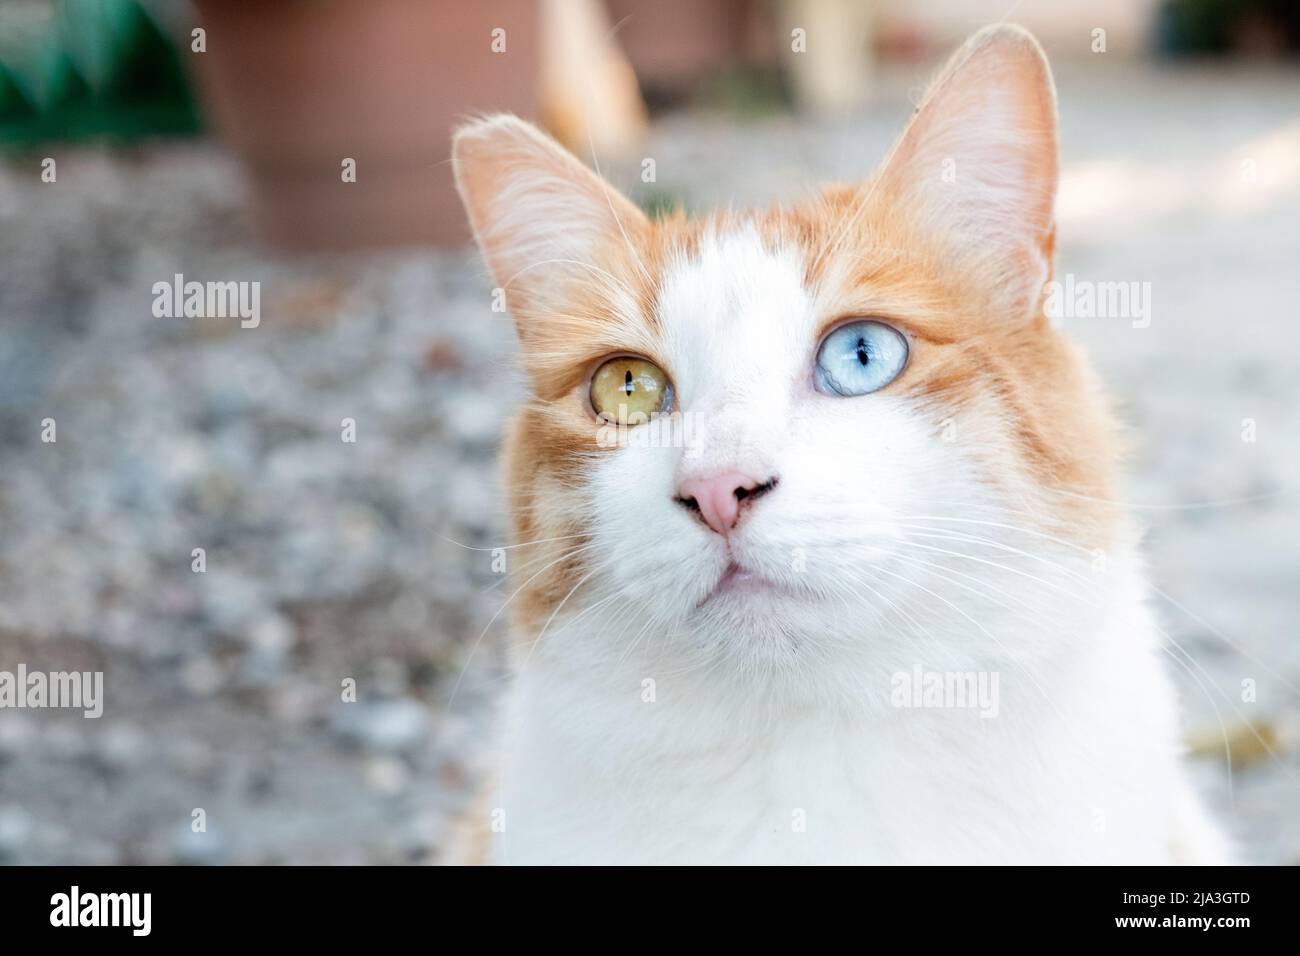 A ginger and white domestic tabby cat with different colour eyes known as a sectoral heterochromia. One eye is blue whilst the other is green Stock Photo